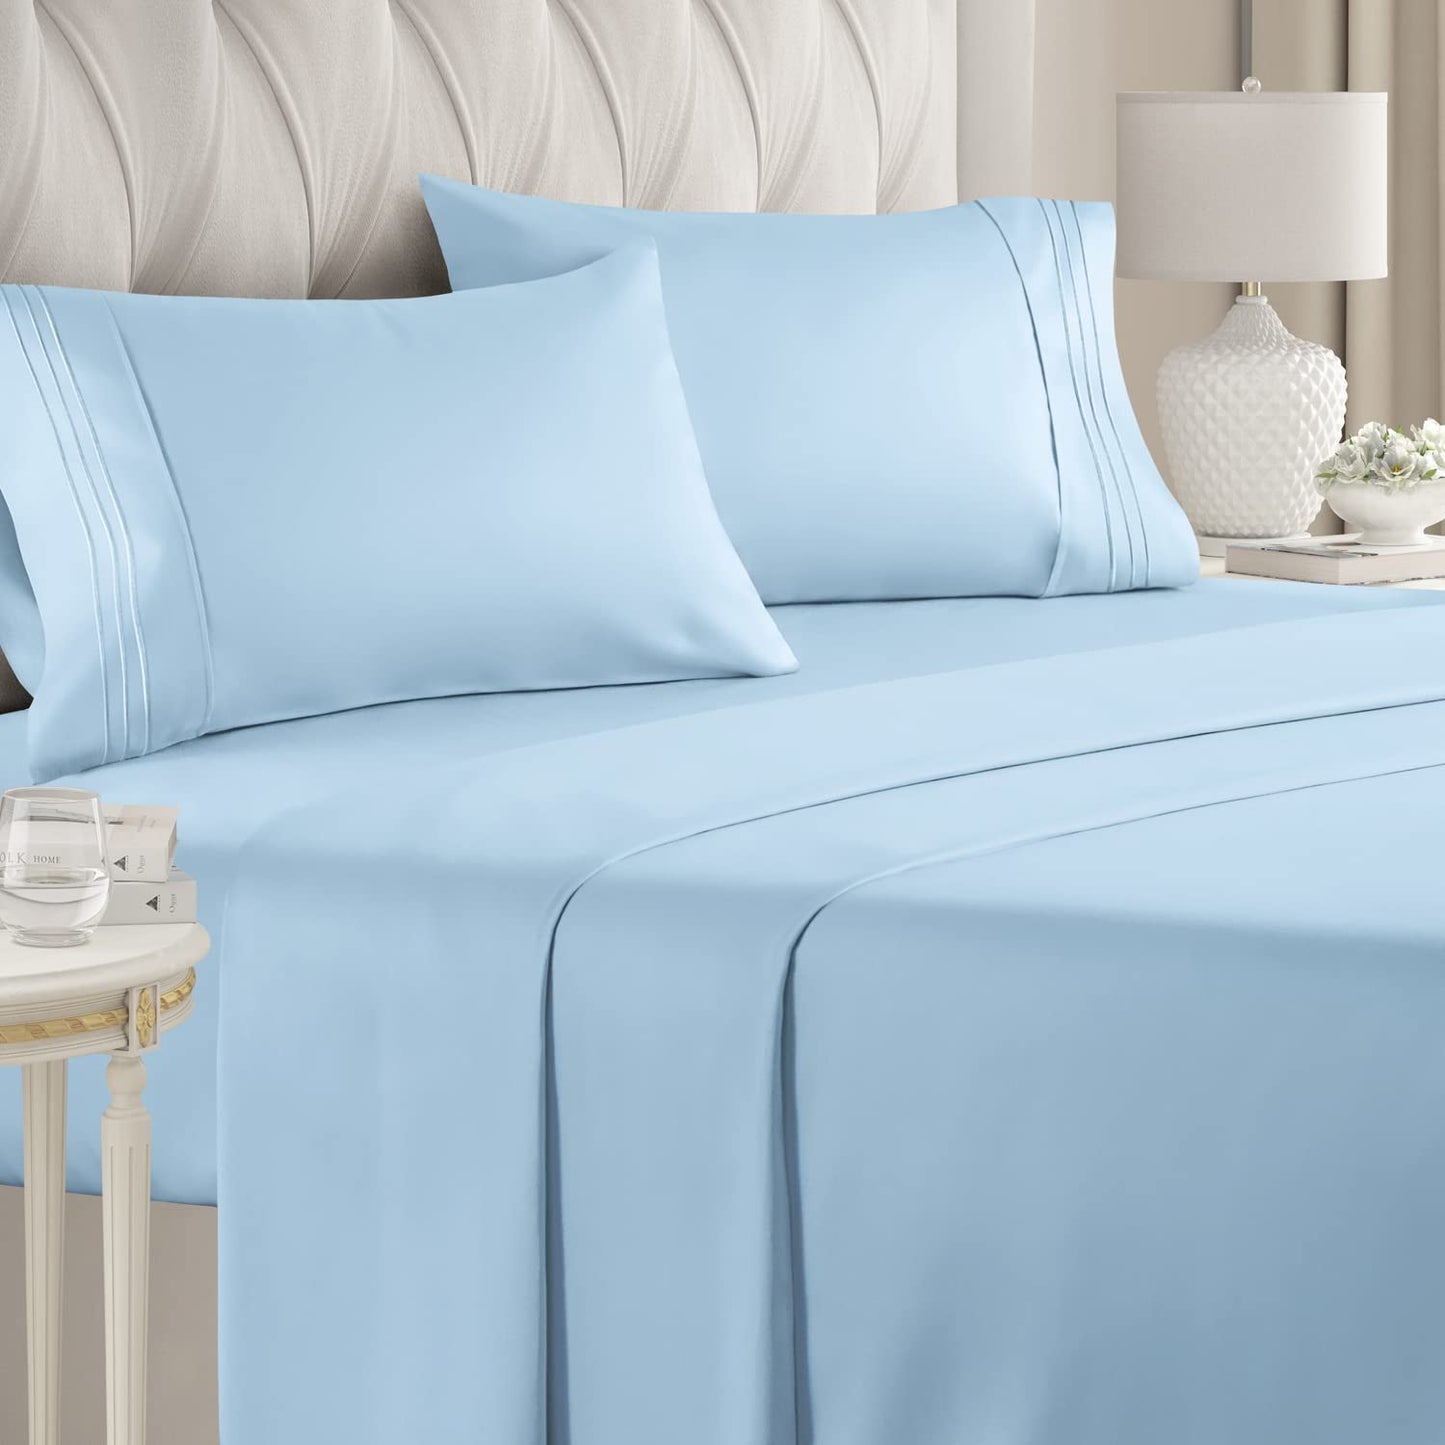 Buy Queen Size Flat Sheet Blue Egyptian Cotton 1000 Thread Count at- Egyptianhomelinens.com